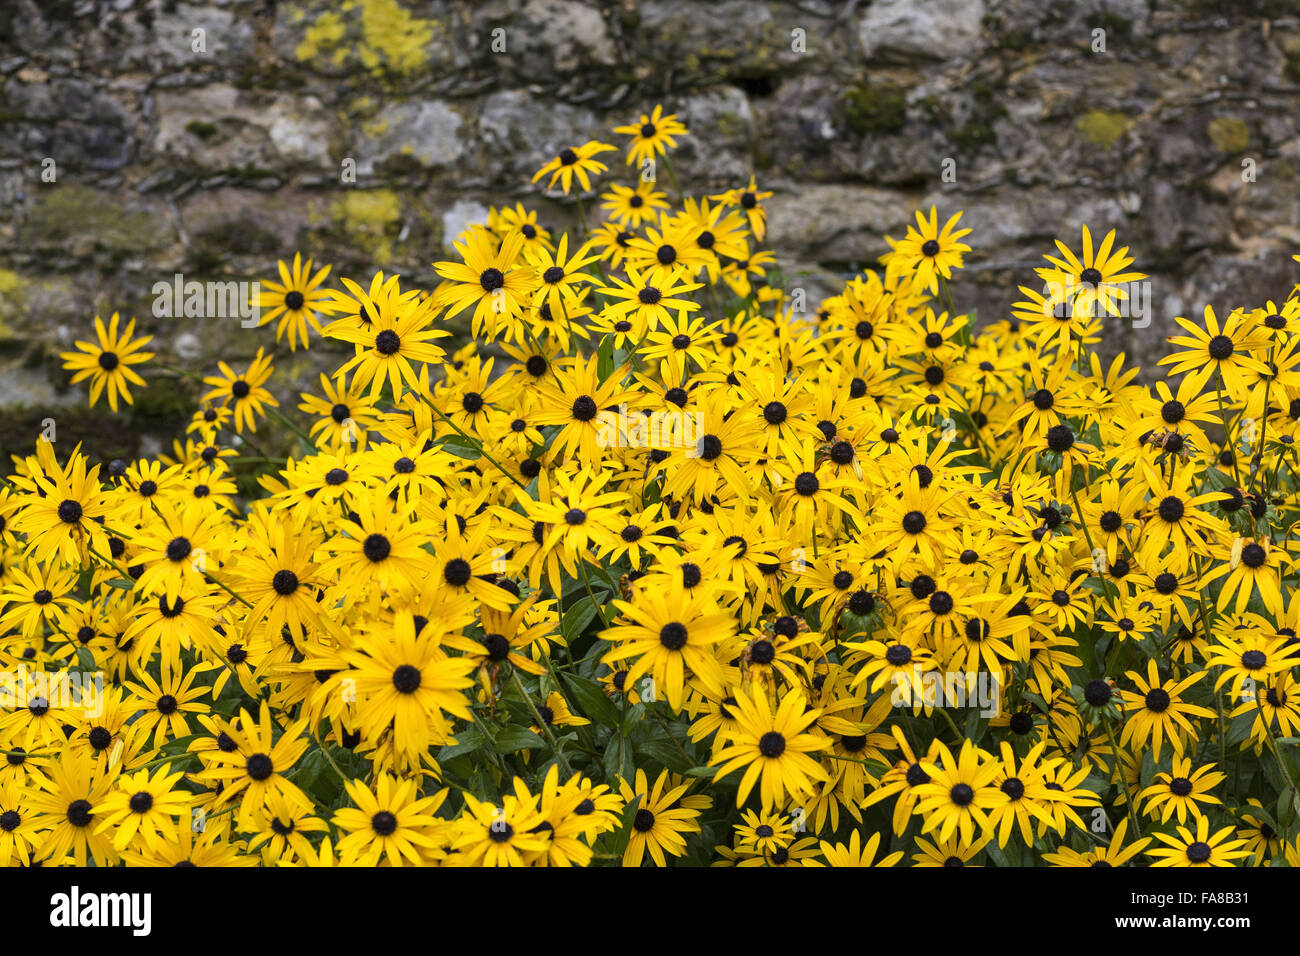 Yellow flowers growing in the garden at Ightham Mote, Kent. Ightham Mote is a medieval moated manor house near Sevenoaks. Stock Photo